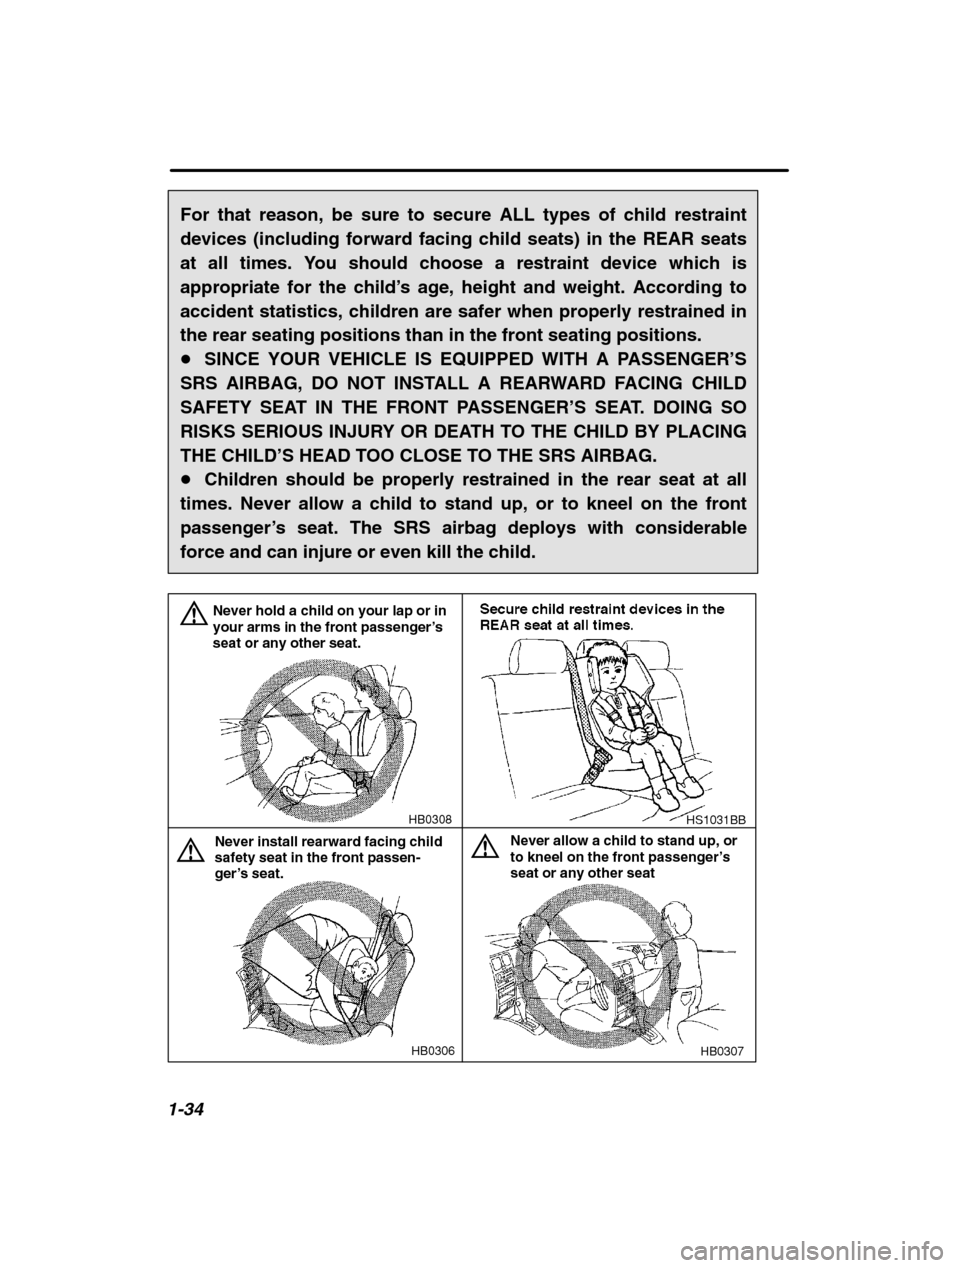 SUBARU LEGACY 2002 3.G Service Manual 1-34
For that reason, be sure to secure ALL types of child restraint 
devices (including forward facing child seats) in the REAR seats
at all times. You should choose a restraint device which isapprop